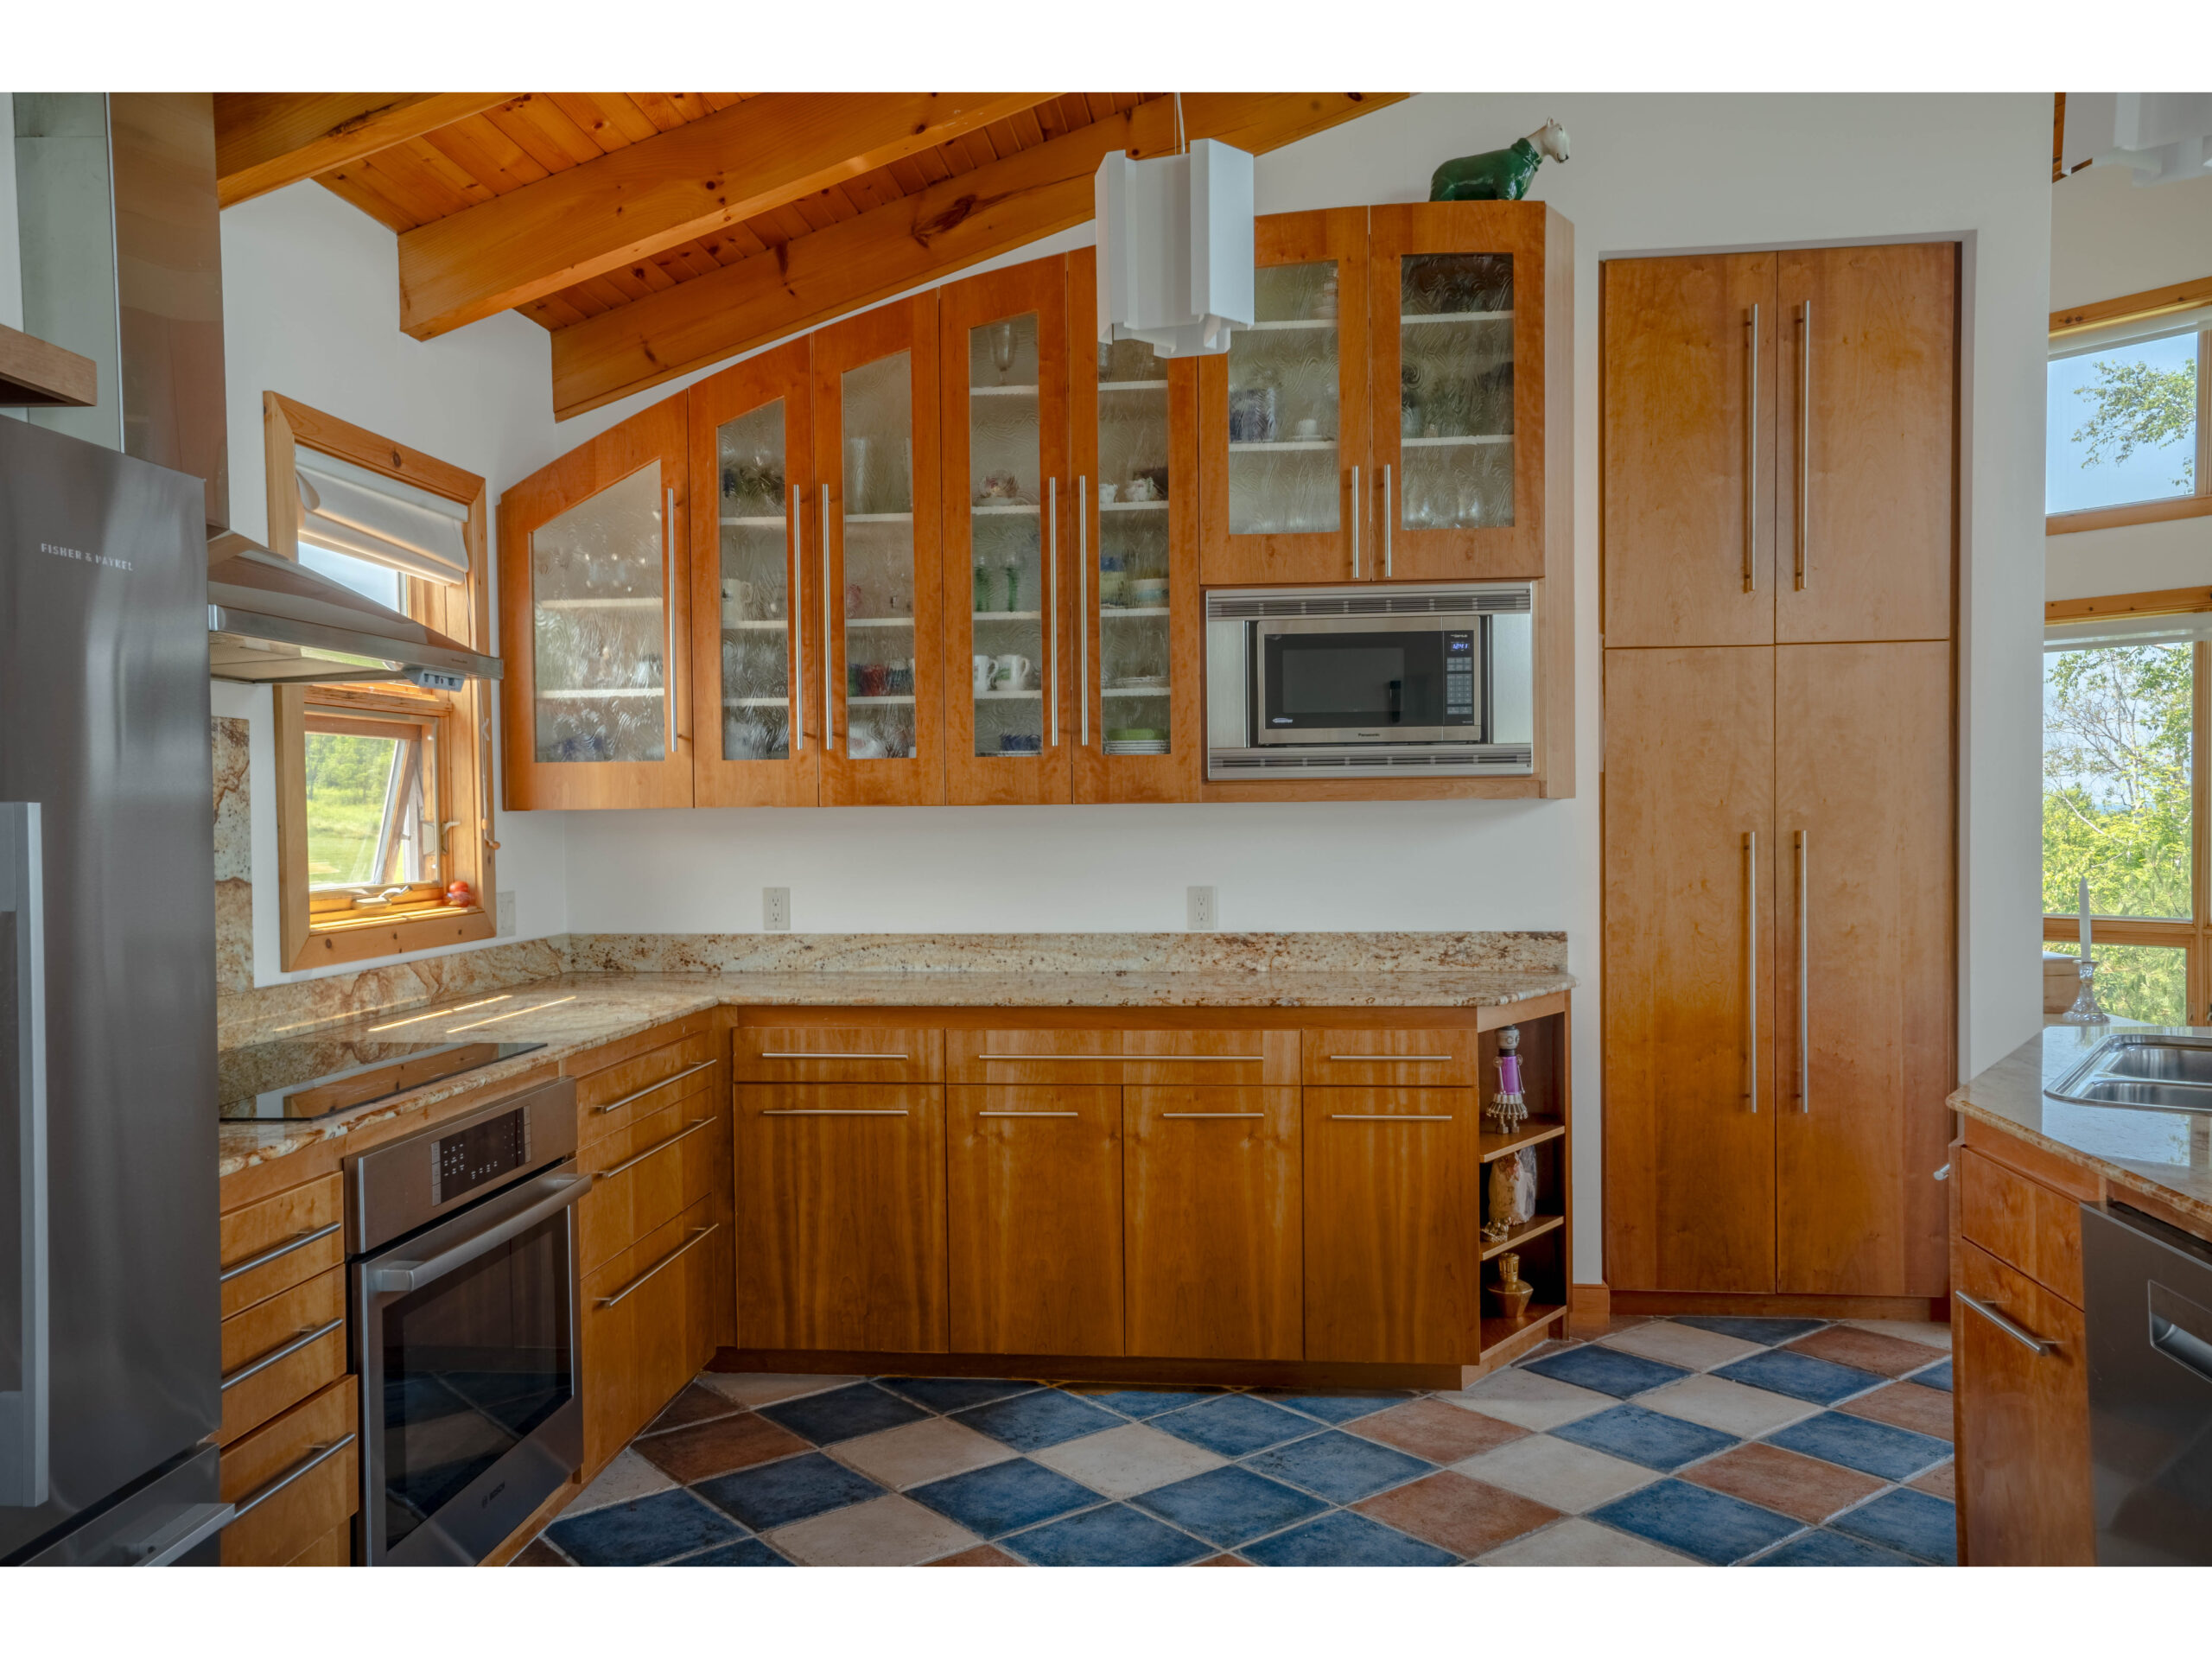 A big kitchen with a colourful tiled floor, stainless steel appliances and granite countertops.